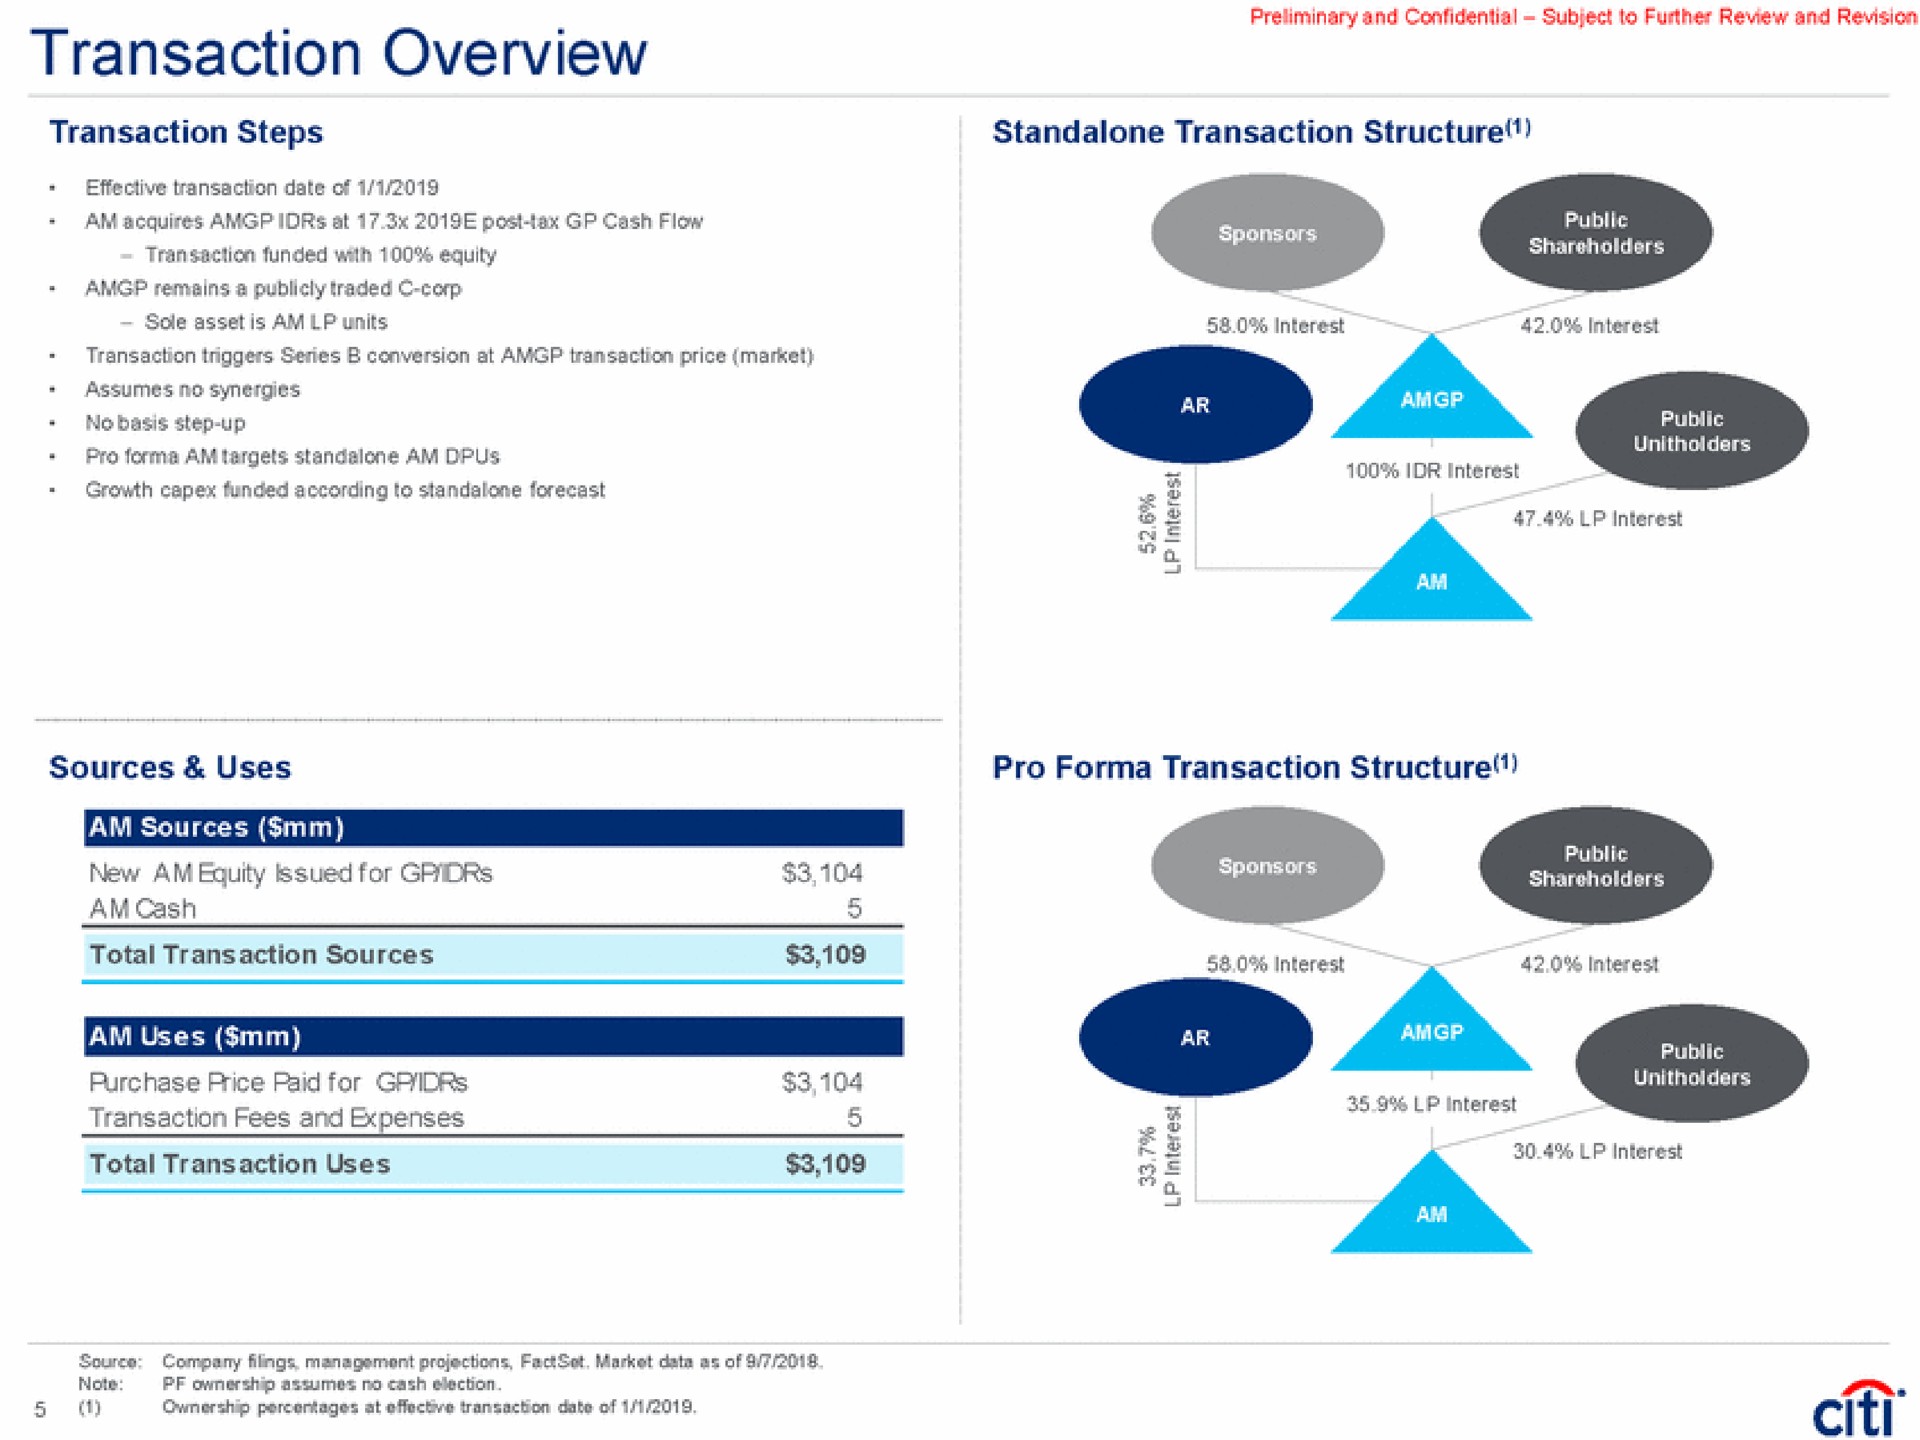 transaction overview | Citi